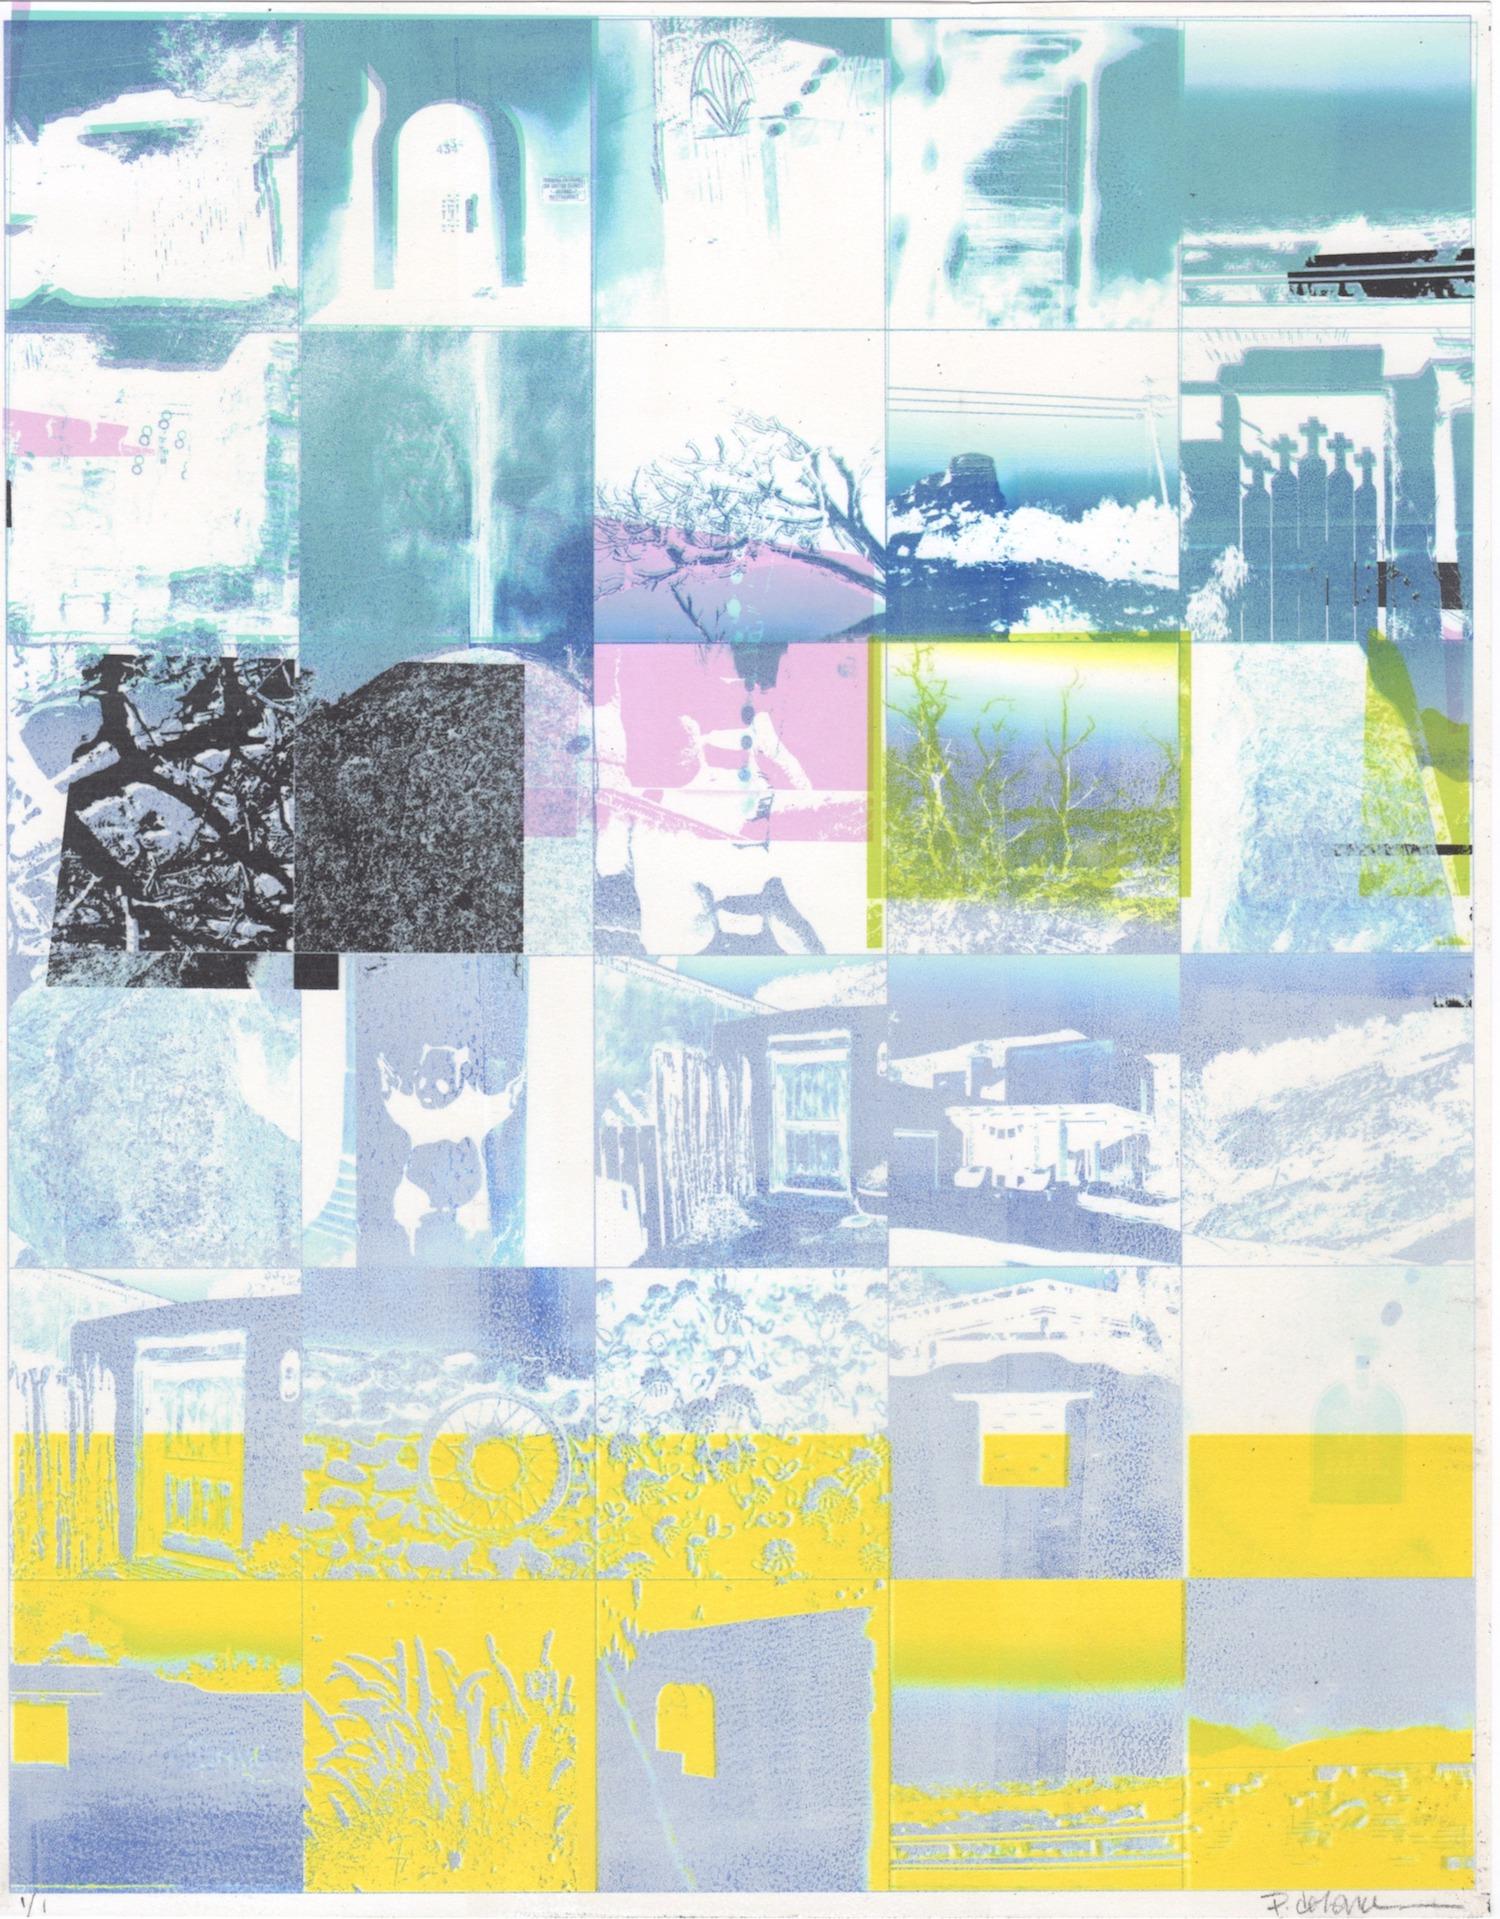 "Life is Full", abstract, landscape, blue, white, yellow, pink, mixed media